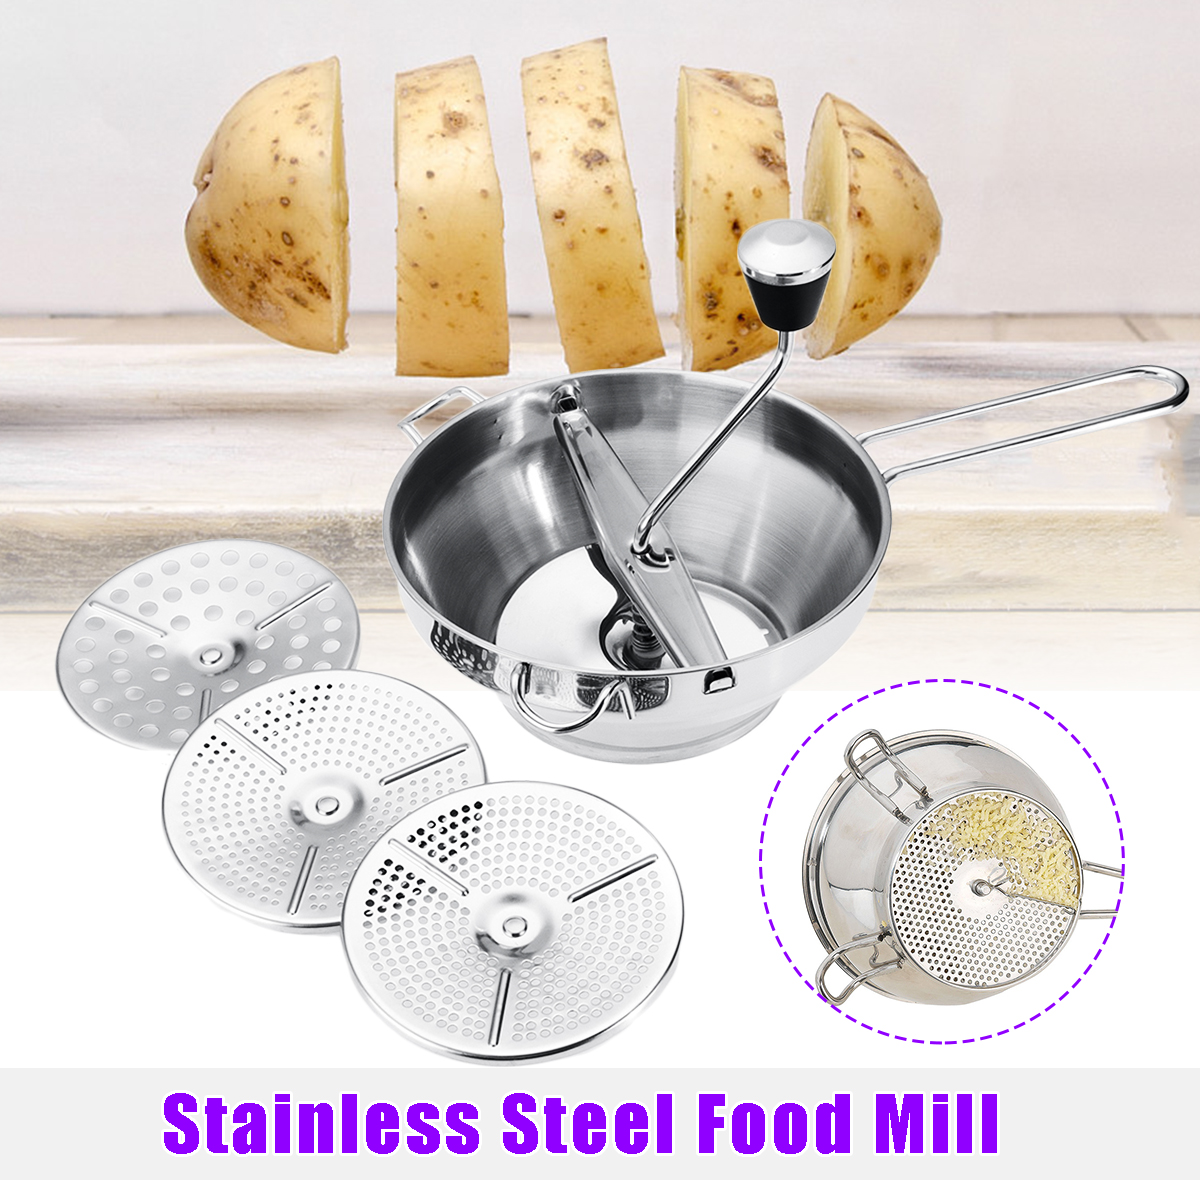 Stainless Steel Food Mill Metal Vegetable/Carrot/Tomato/Potato/Rice Mixer Maker Cutter